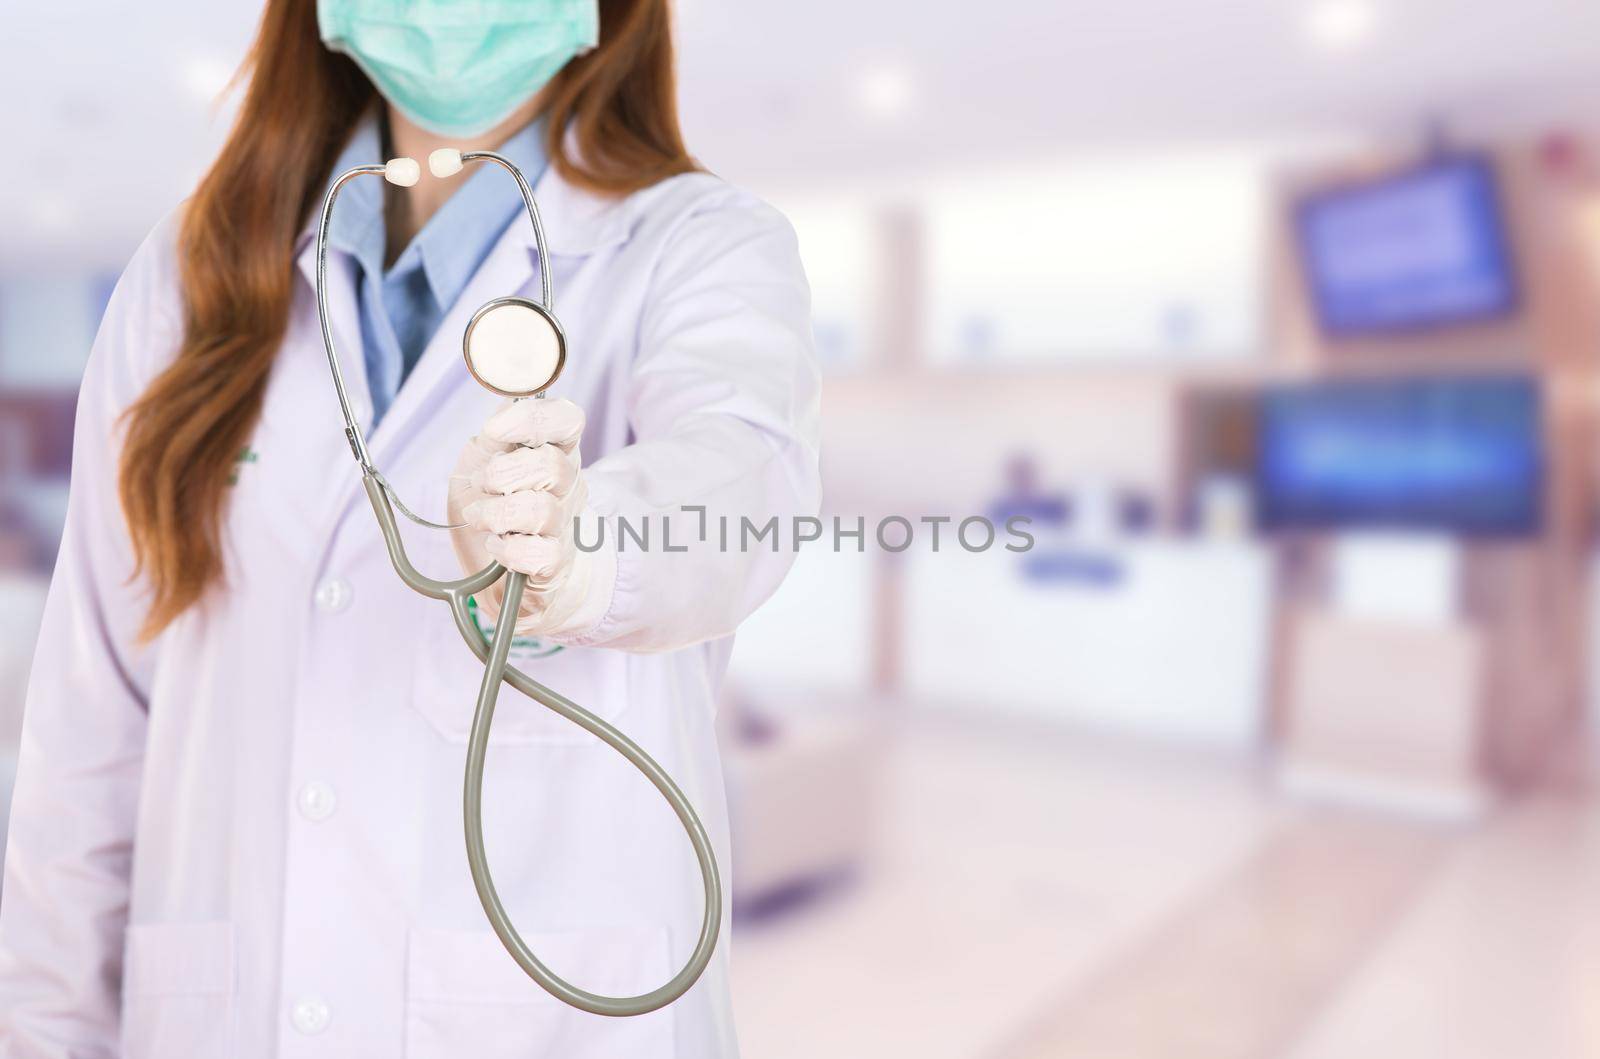 Female doctor with mask and stethoscope isolated on white background